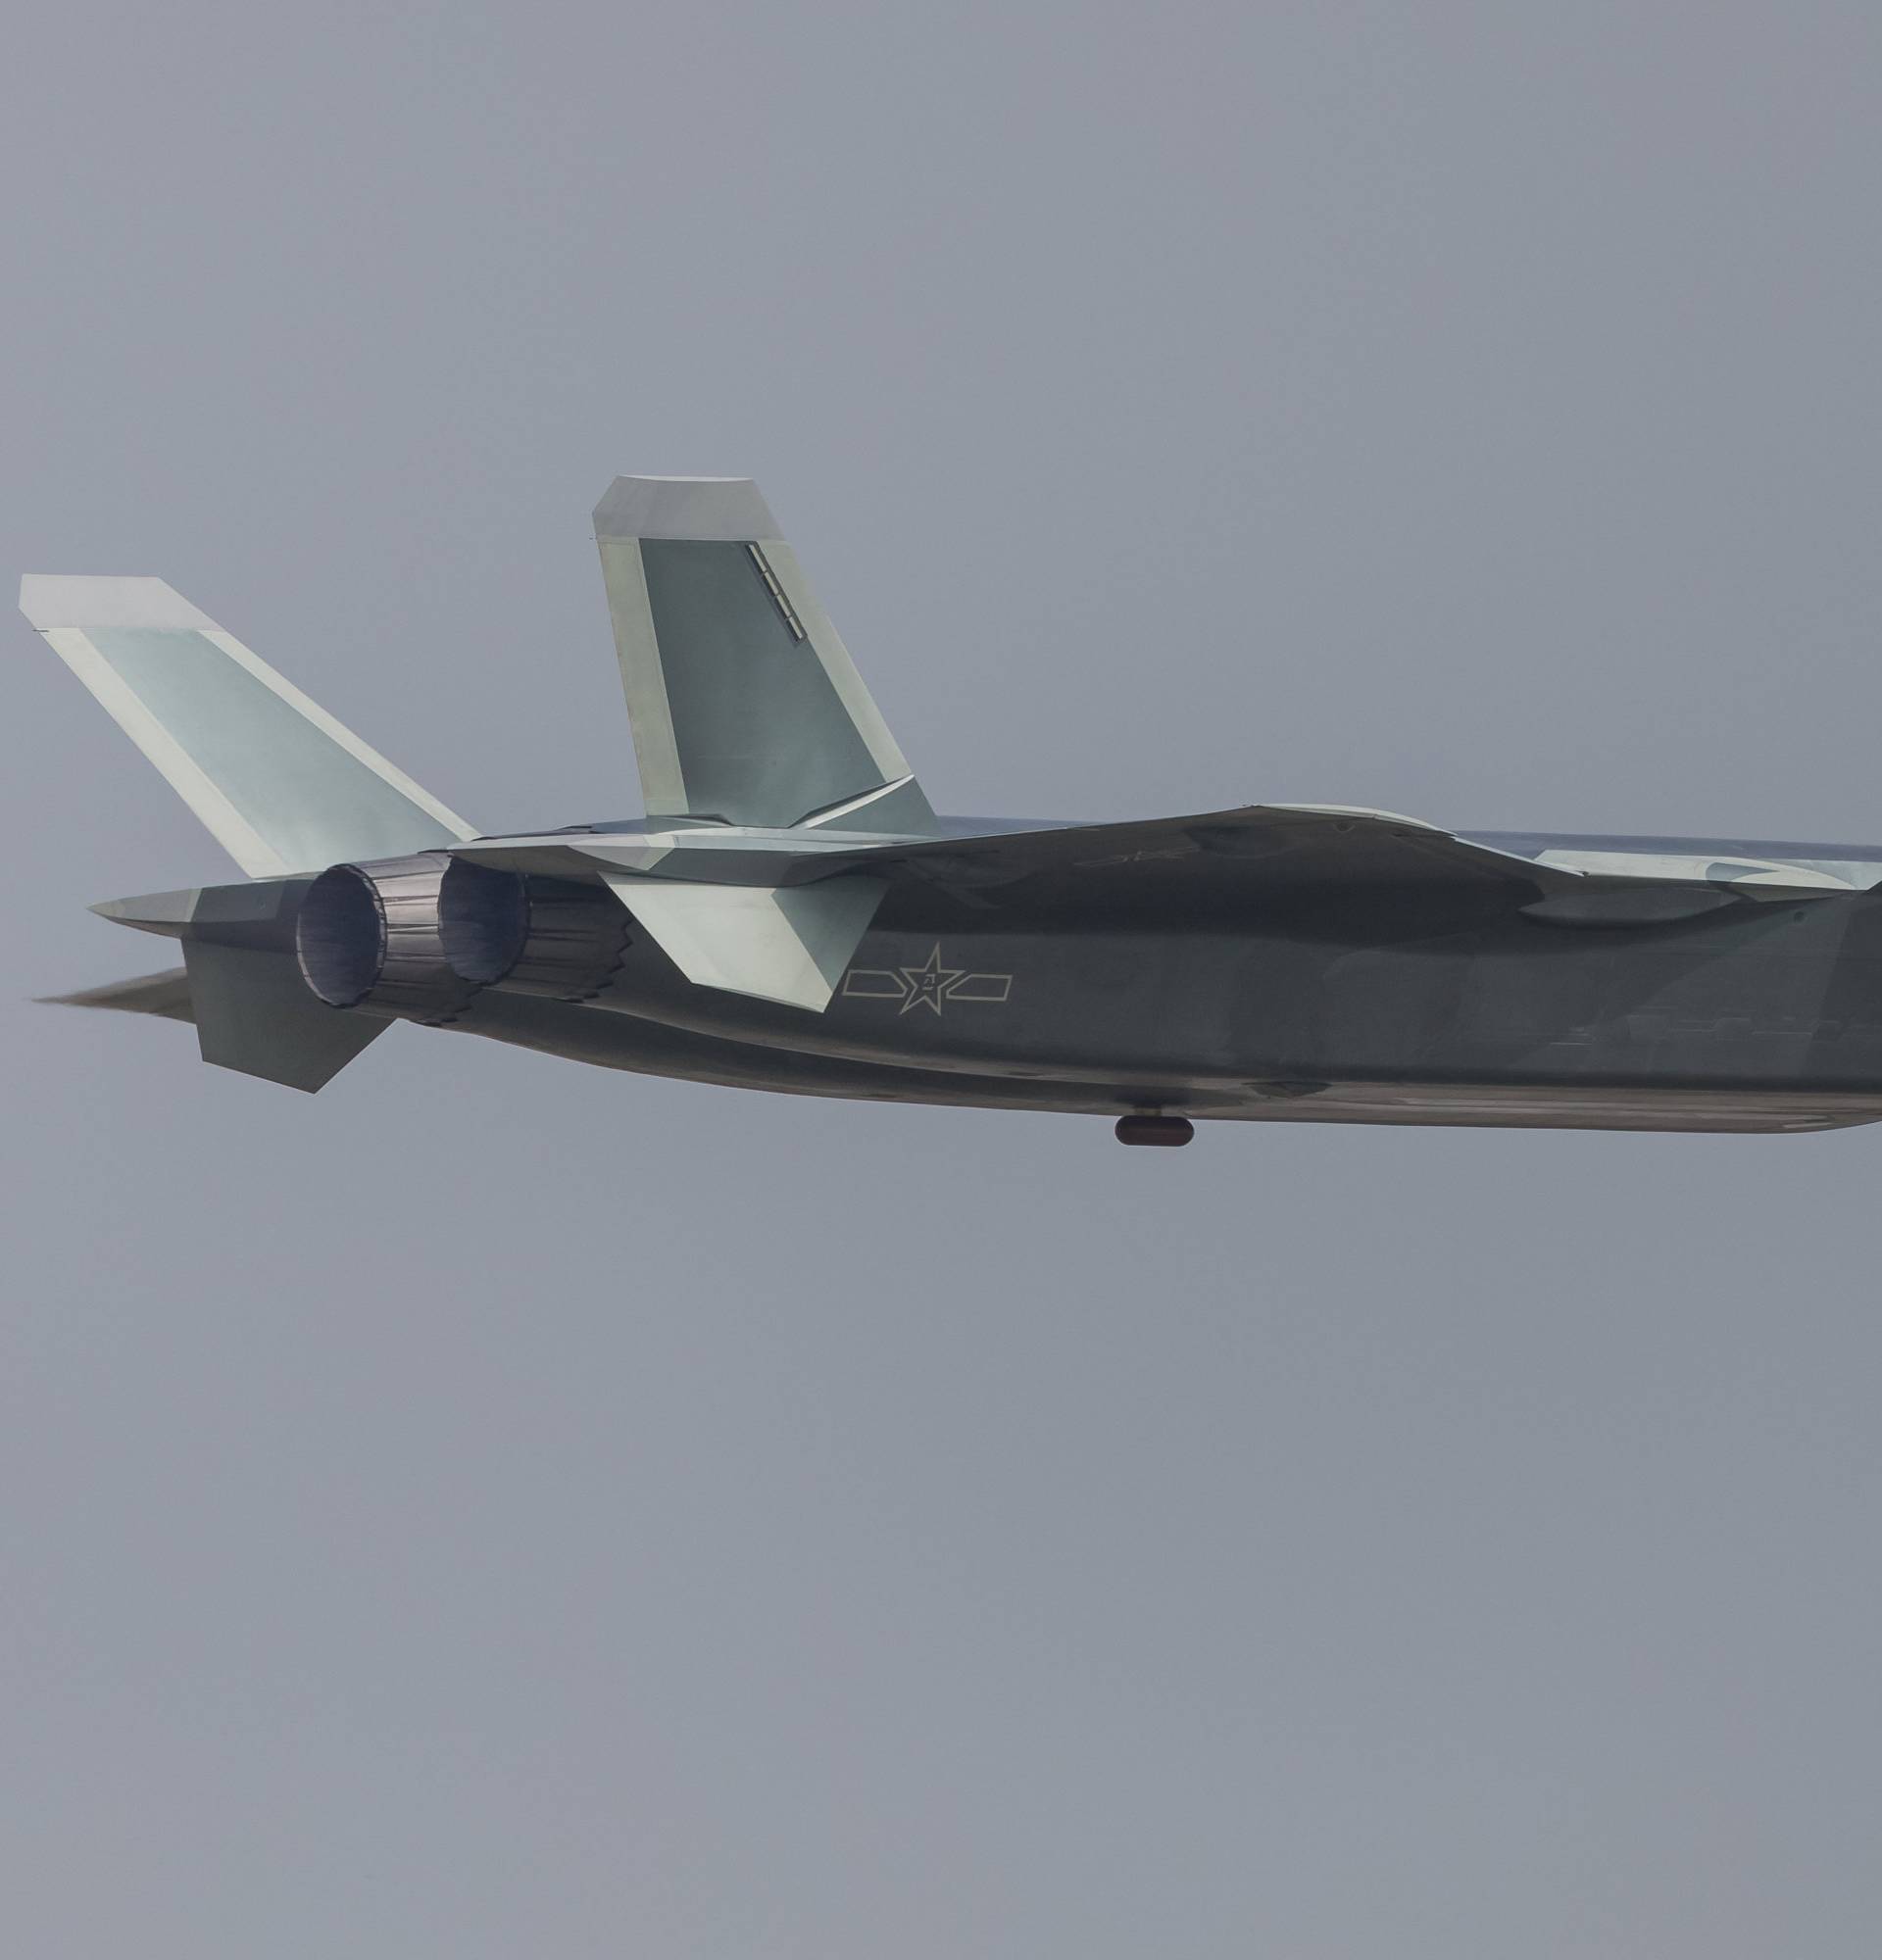 China unveils its J-20 stealth fighter during an air show in Zhuhai